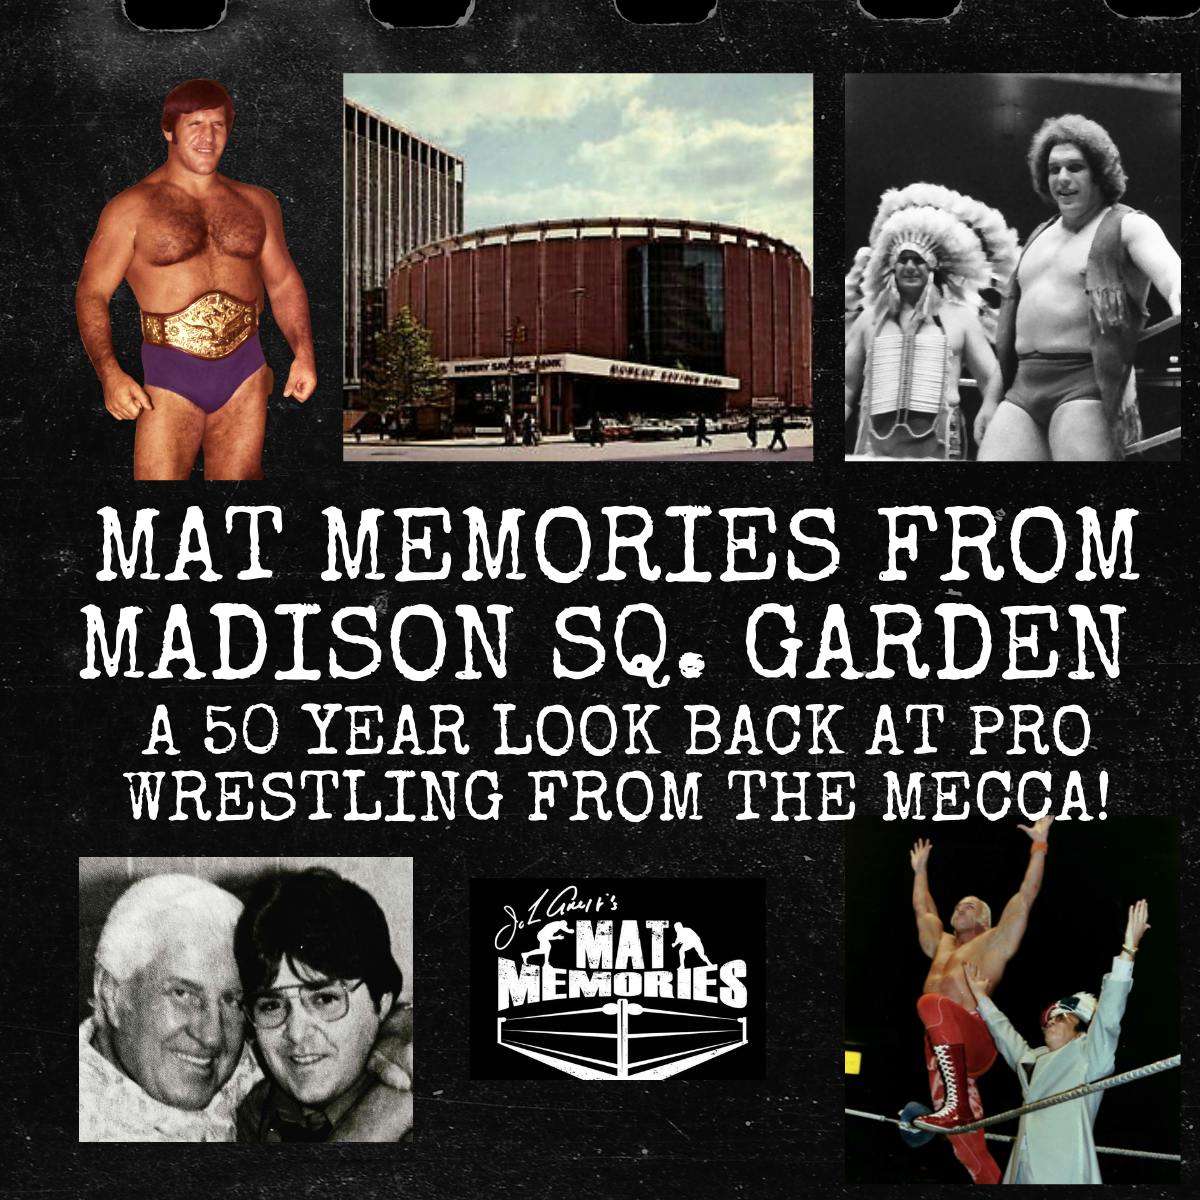 Mat Memories from Madison Square Garden - Big name who never wrestled at MSG with Cary Silken